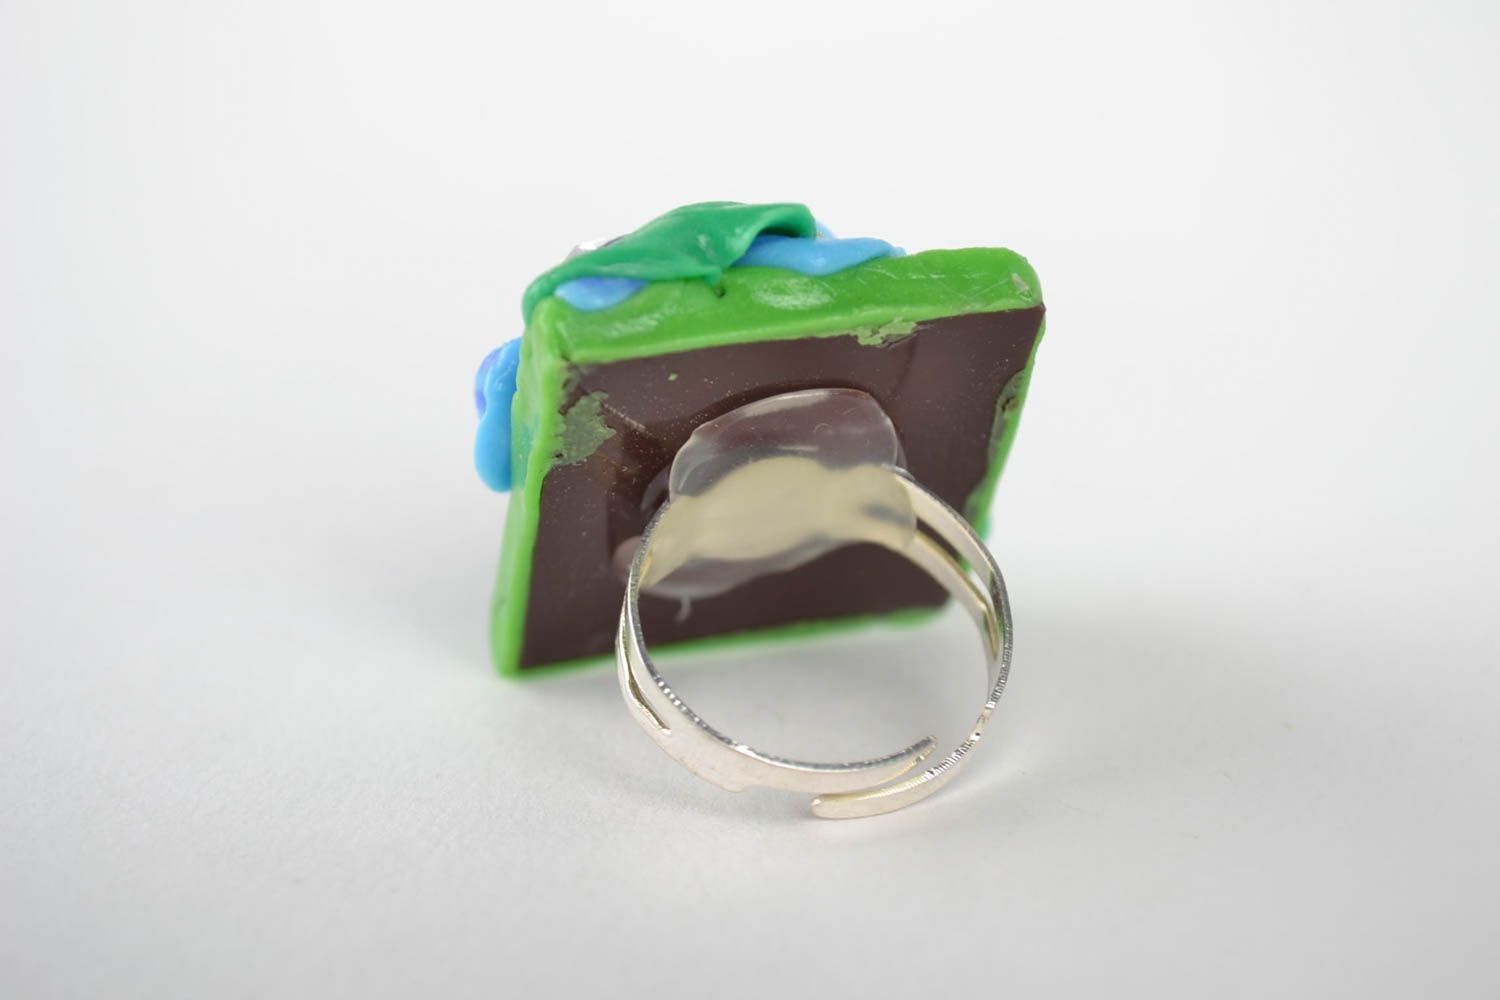 Plastic ring handmade jewelry rings for women designer accessories gifts for her photo 3